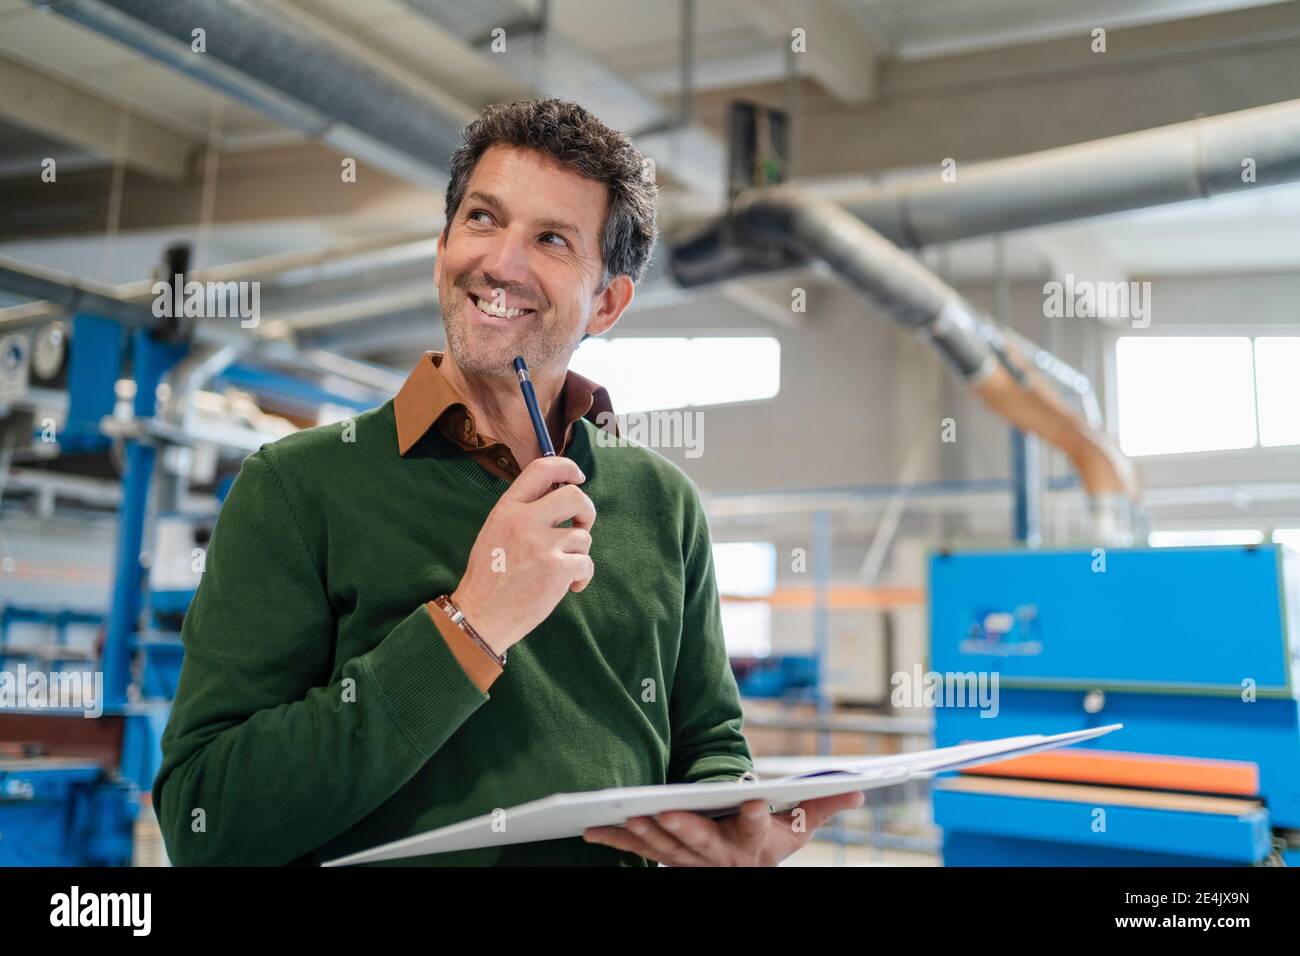 Portrait of carpenter smiling with ring binder in hands Stock Photo